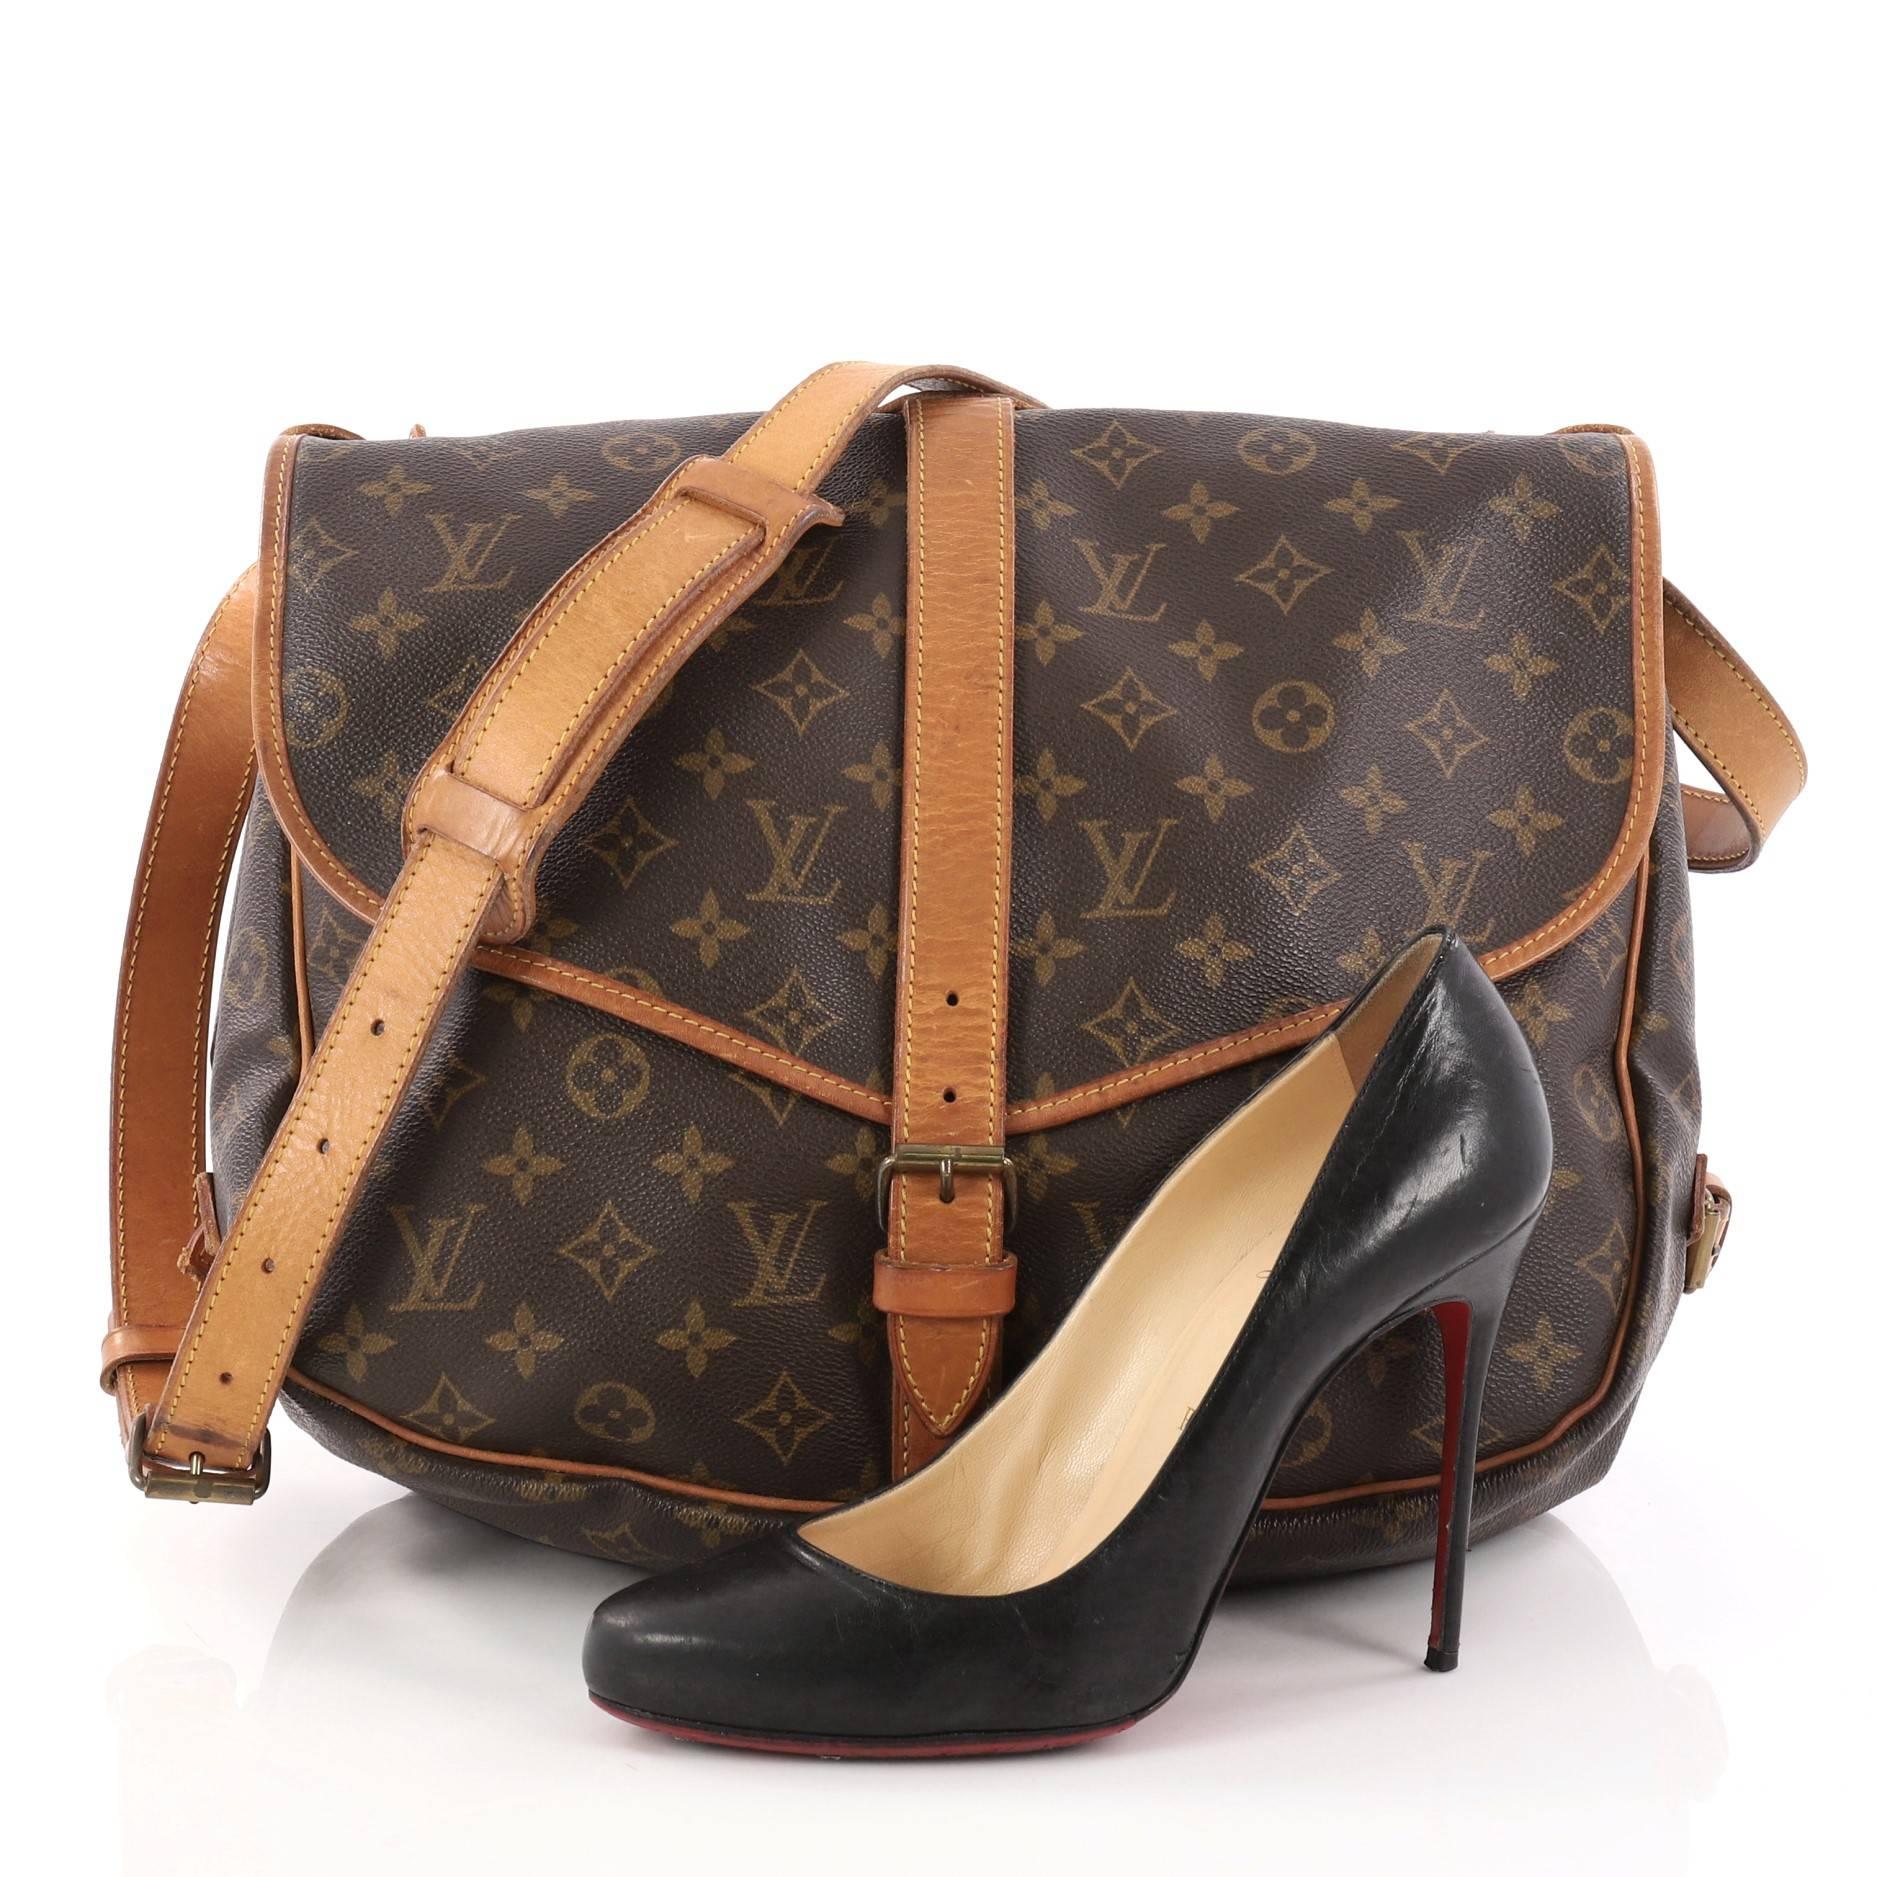 This authentic Louis Vuitton Saumur Handbag Monogram Canvas MM showcases the brand's reinterpretation of the classic saddle bag. Crafted in Louis Vuitton's popular brown monogram coated canvas, this bag features long adjustable strap, double saddle